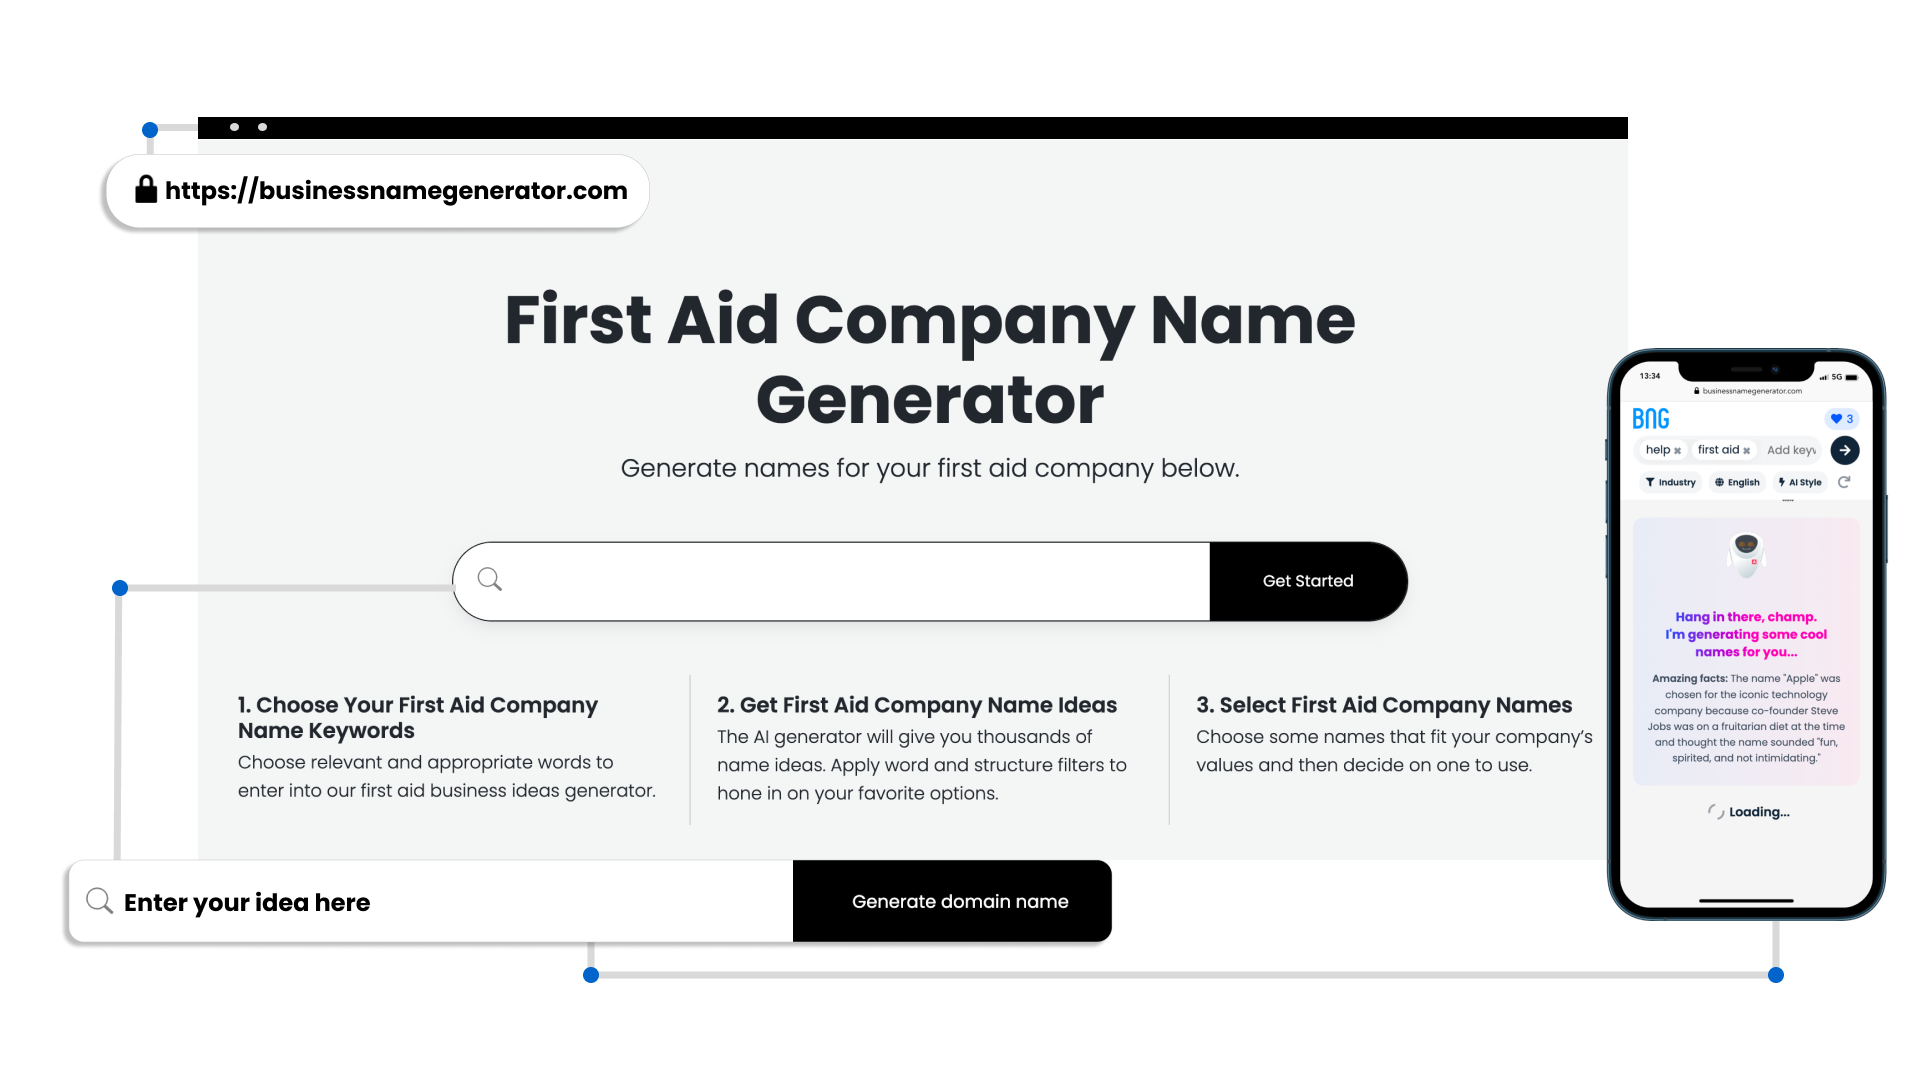 Benefits of our First Aid Company Name Generator